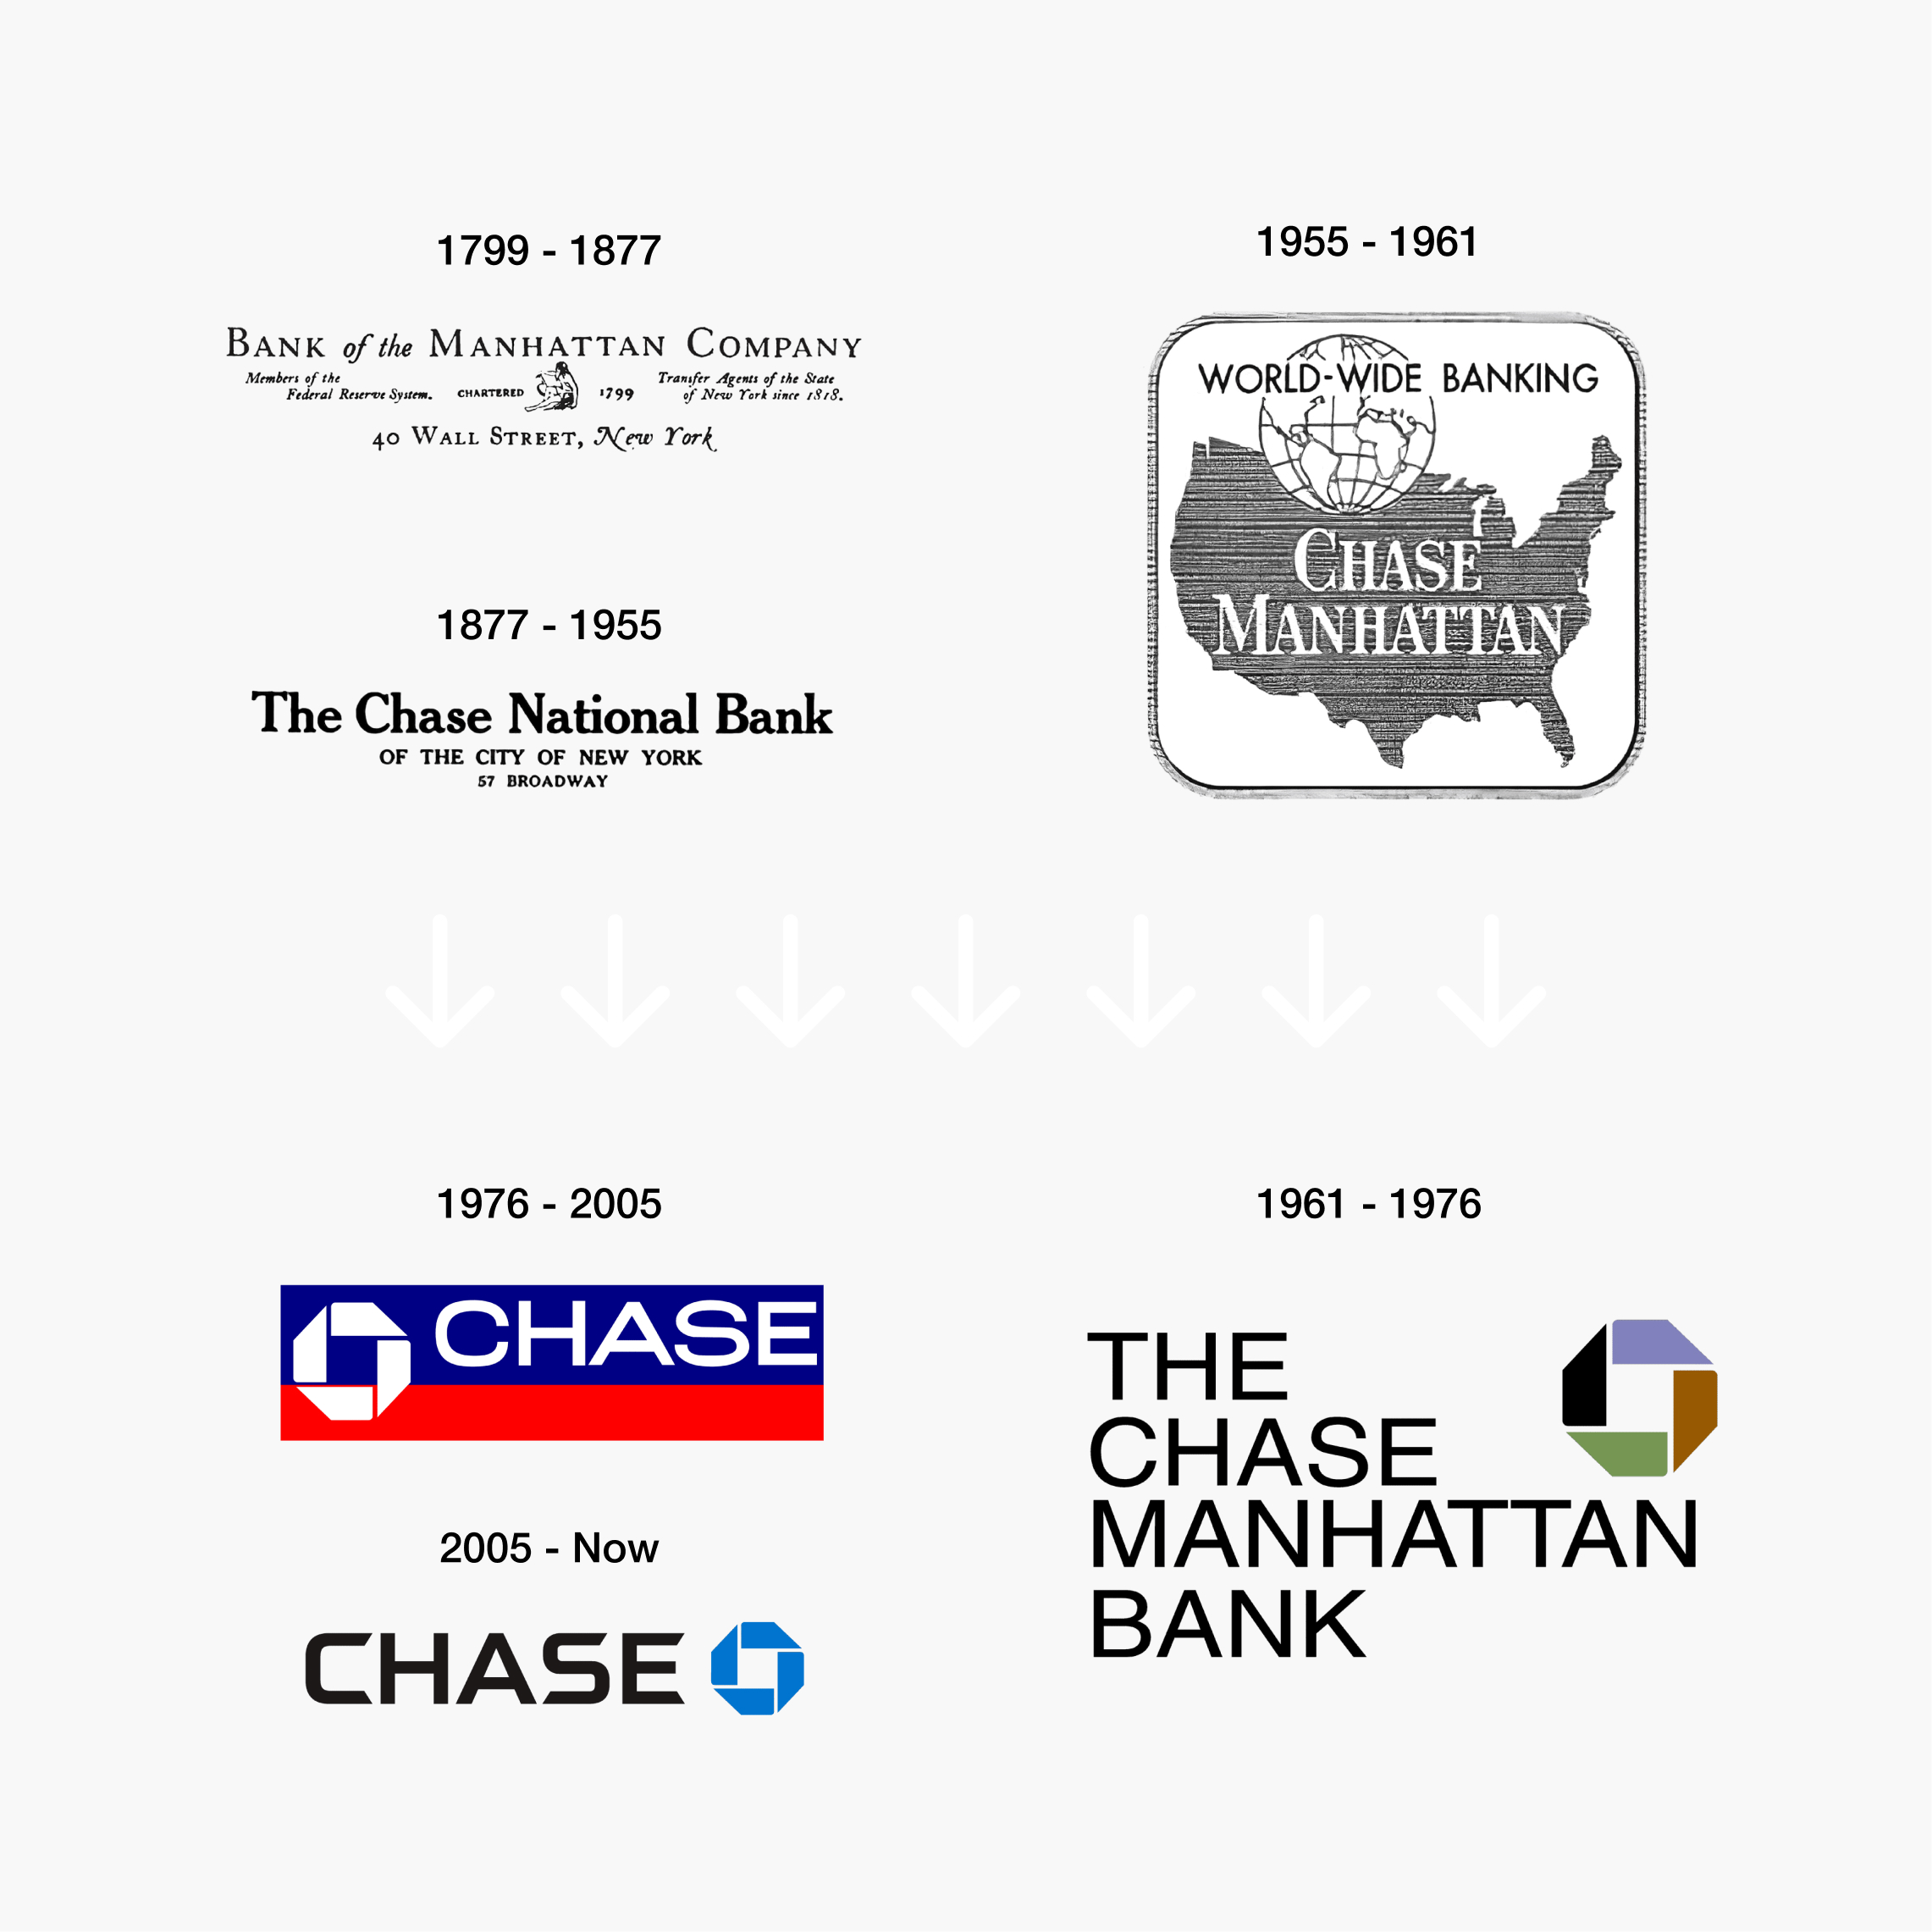 This image displays a chronological arrangement of six logos, each representing the branding of Chase bank over different historical periods, with the dates listed above each logo. In the top left, the period from 1799 to 1877 shows a logo with the text "Bank of the Manhattan Company" in a serif font, along with the address "40 Wall Street, New York". Directly below, for 1877 to 1955, "The Chase National Bank of the City of New York 57 Broadway" is written in a bold serif font. On the top right, the logo for 1955 to 1961 features a shape resembling the United States map with a pattern of lines and the words "WORLD-WIDE BANKING CHASE MANHATTAN". Below it, for 1961 to 1976, "THE CHASE MANHATTAN BANK" is written in bold block letters within a dark square with a colorful right-angled triangle motif. In the bottom left, representing 1976 to 2005, is the familiar Chase logo with a bold "CHASE" over a blue octagon intersecting a red square. Finally, the logo for 2005 to the present is a simplified version of the previous one, with "CHASE" in a sans-serif font next to a blue octagon. These logos represent the evolution of Chase's brand identity over time.